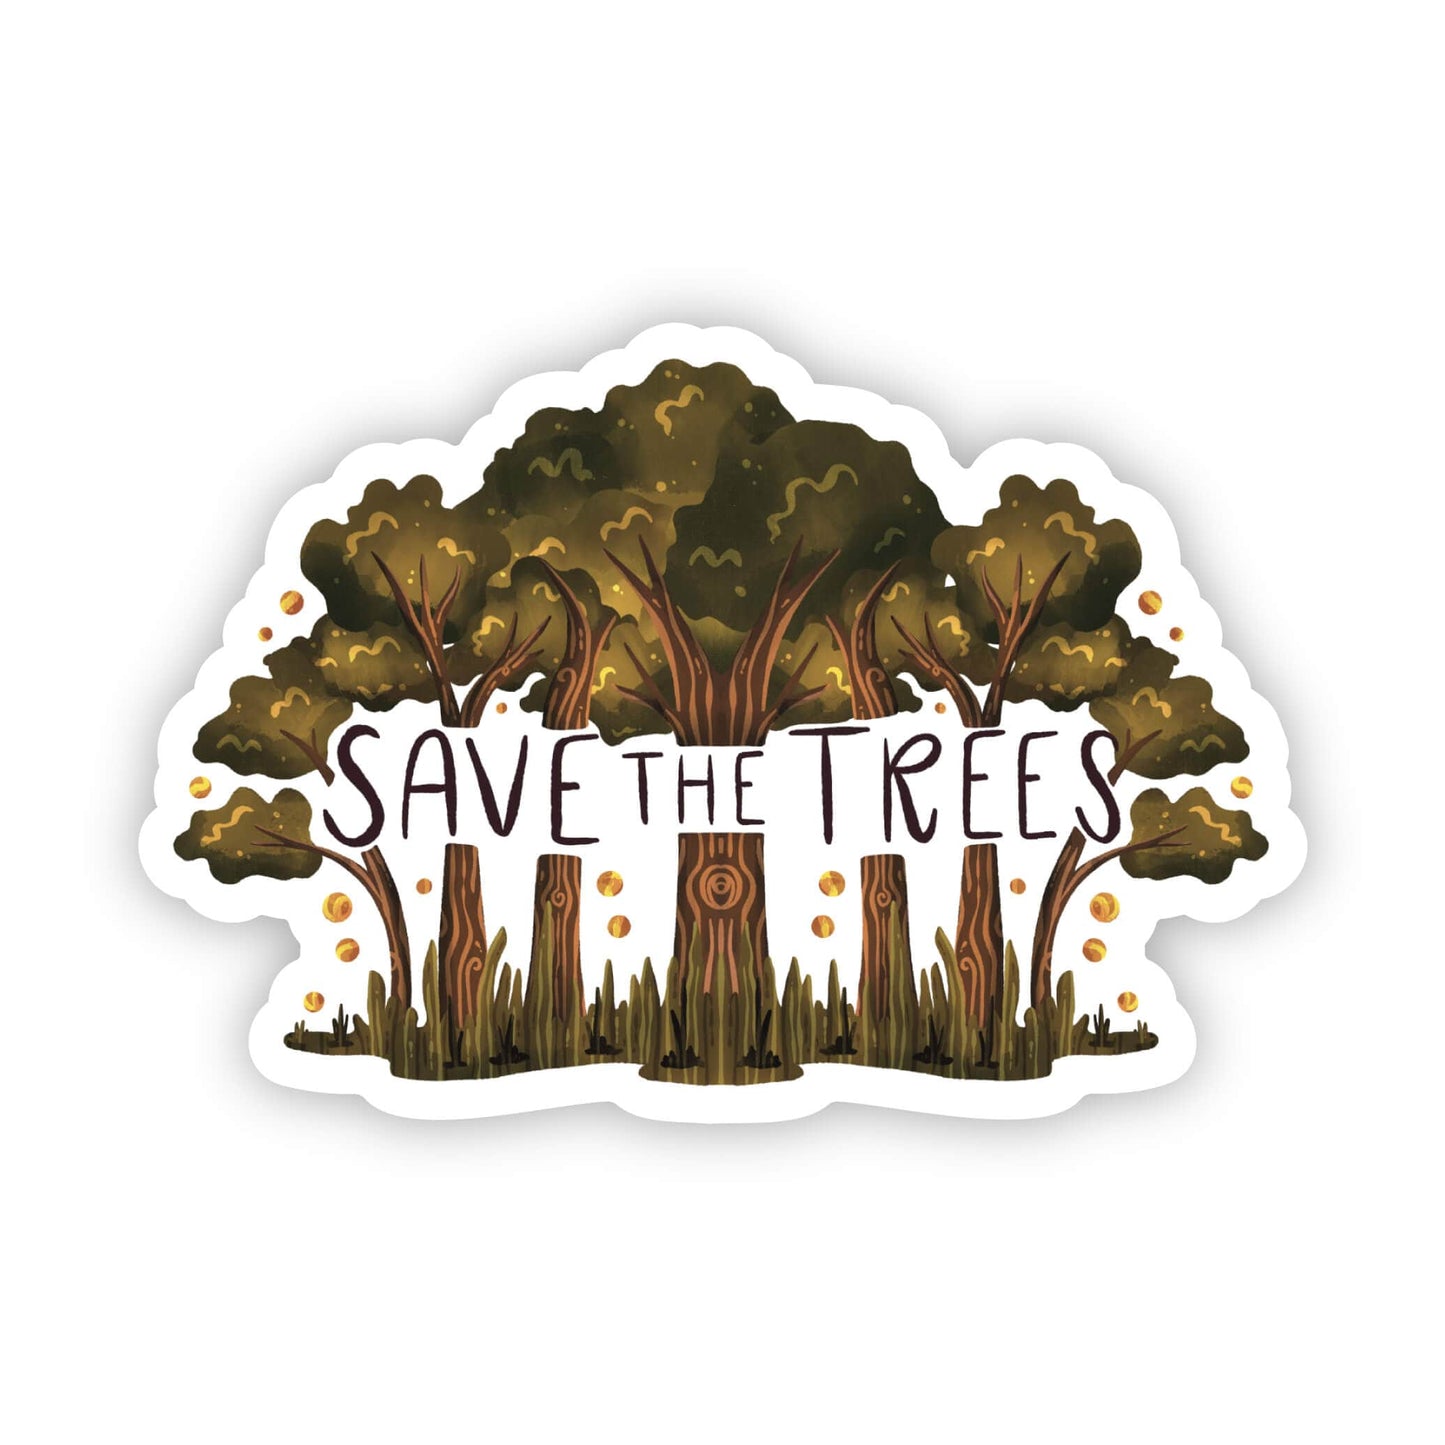 Save the trees sticker